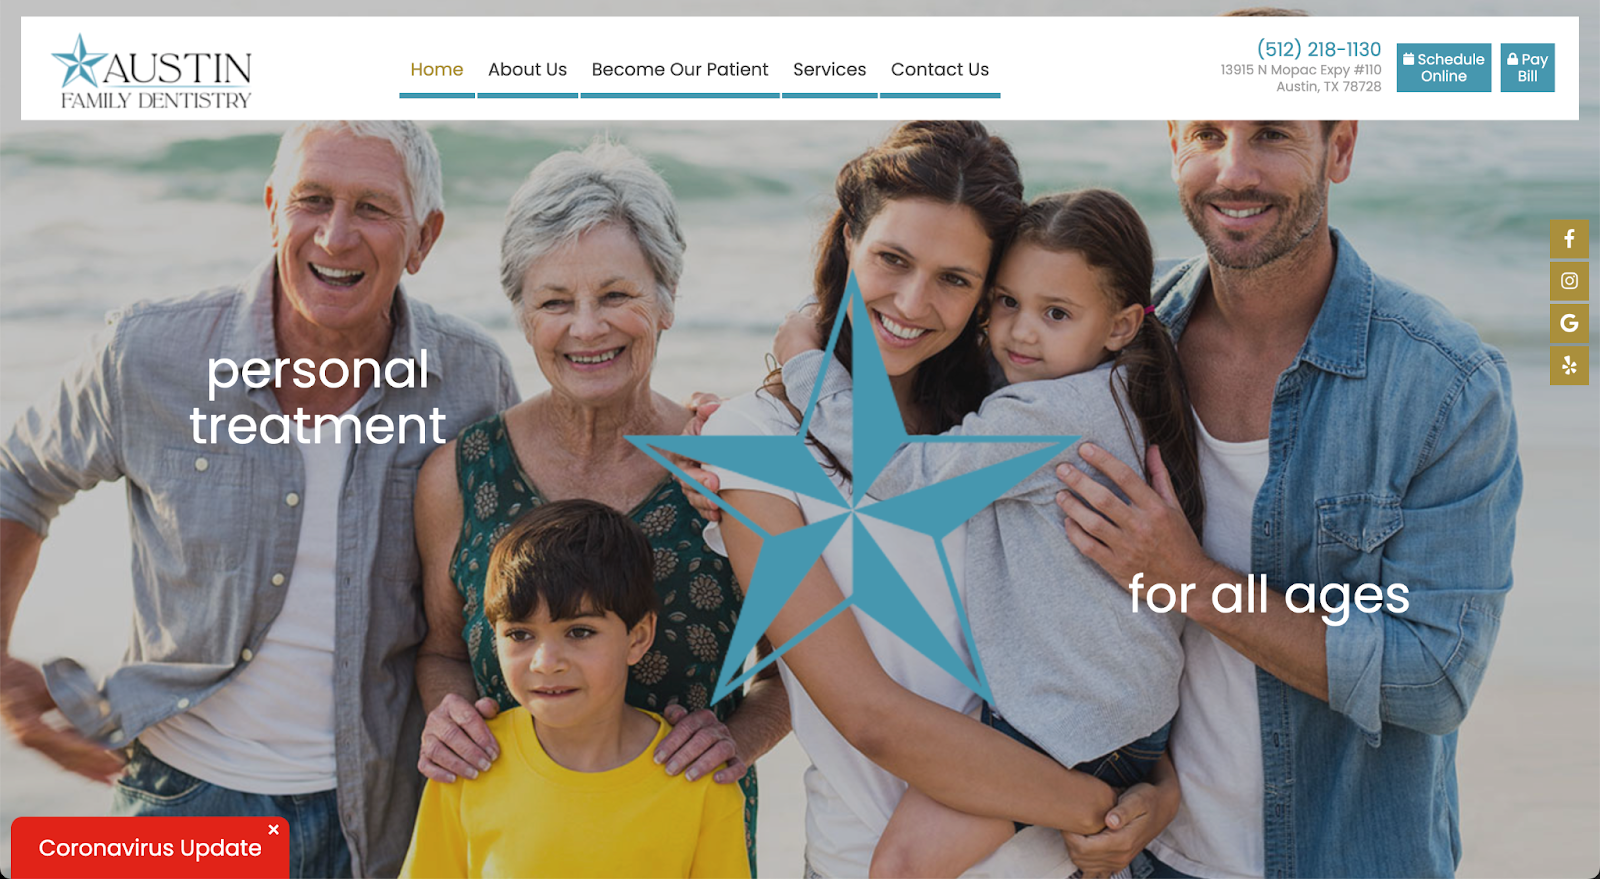 Show your state pride when you design your next dental website, like the Austin Family DDS website has